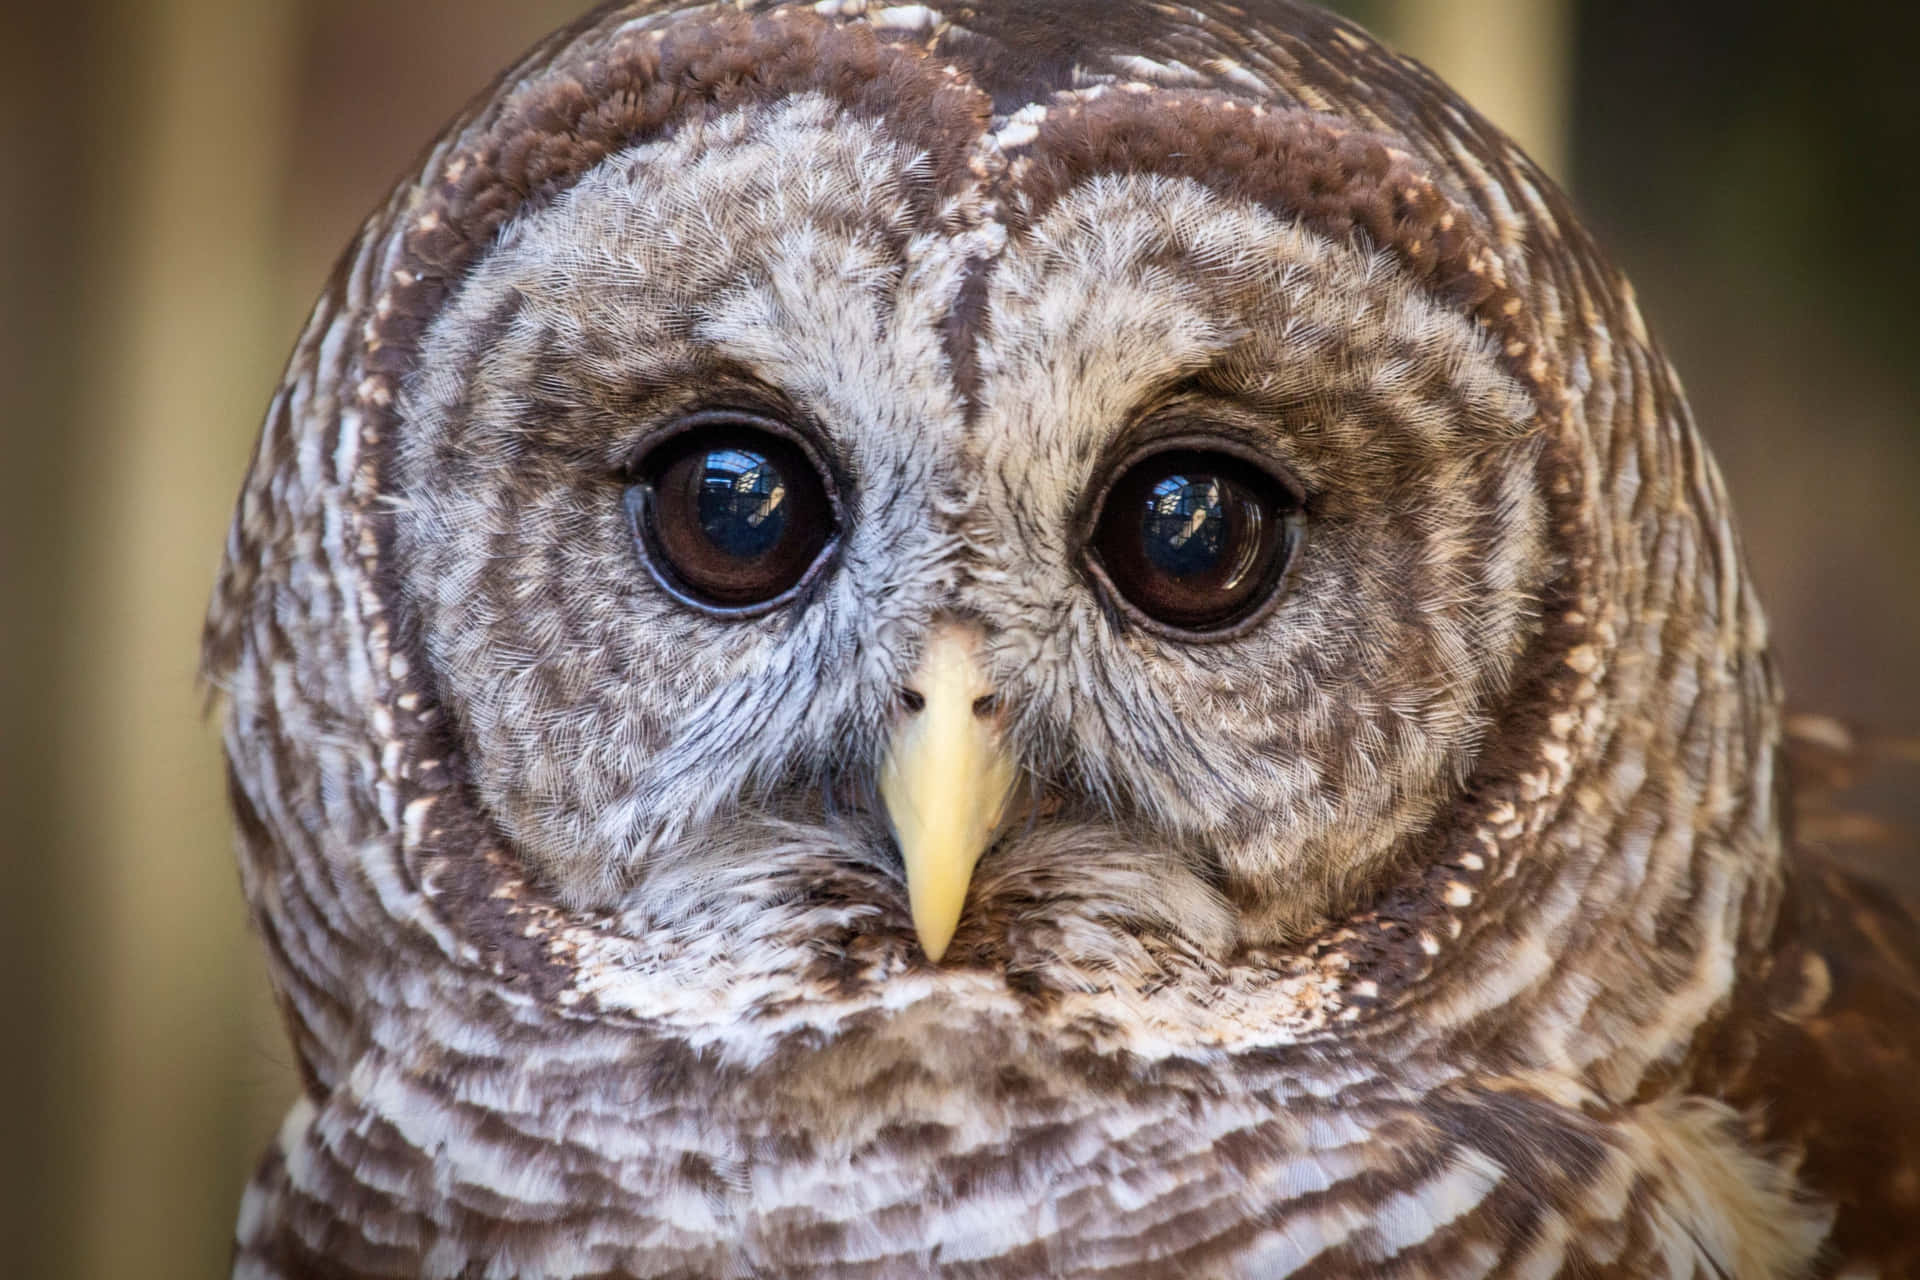 A majestic close-up of a giant owl